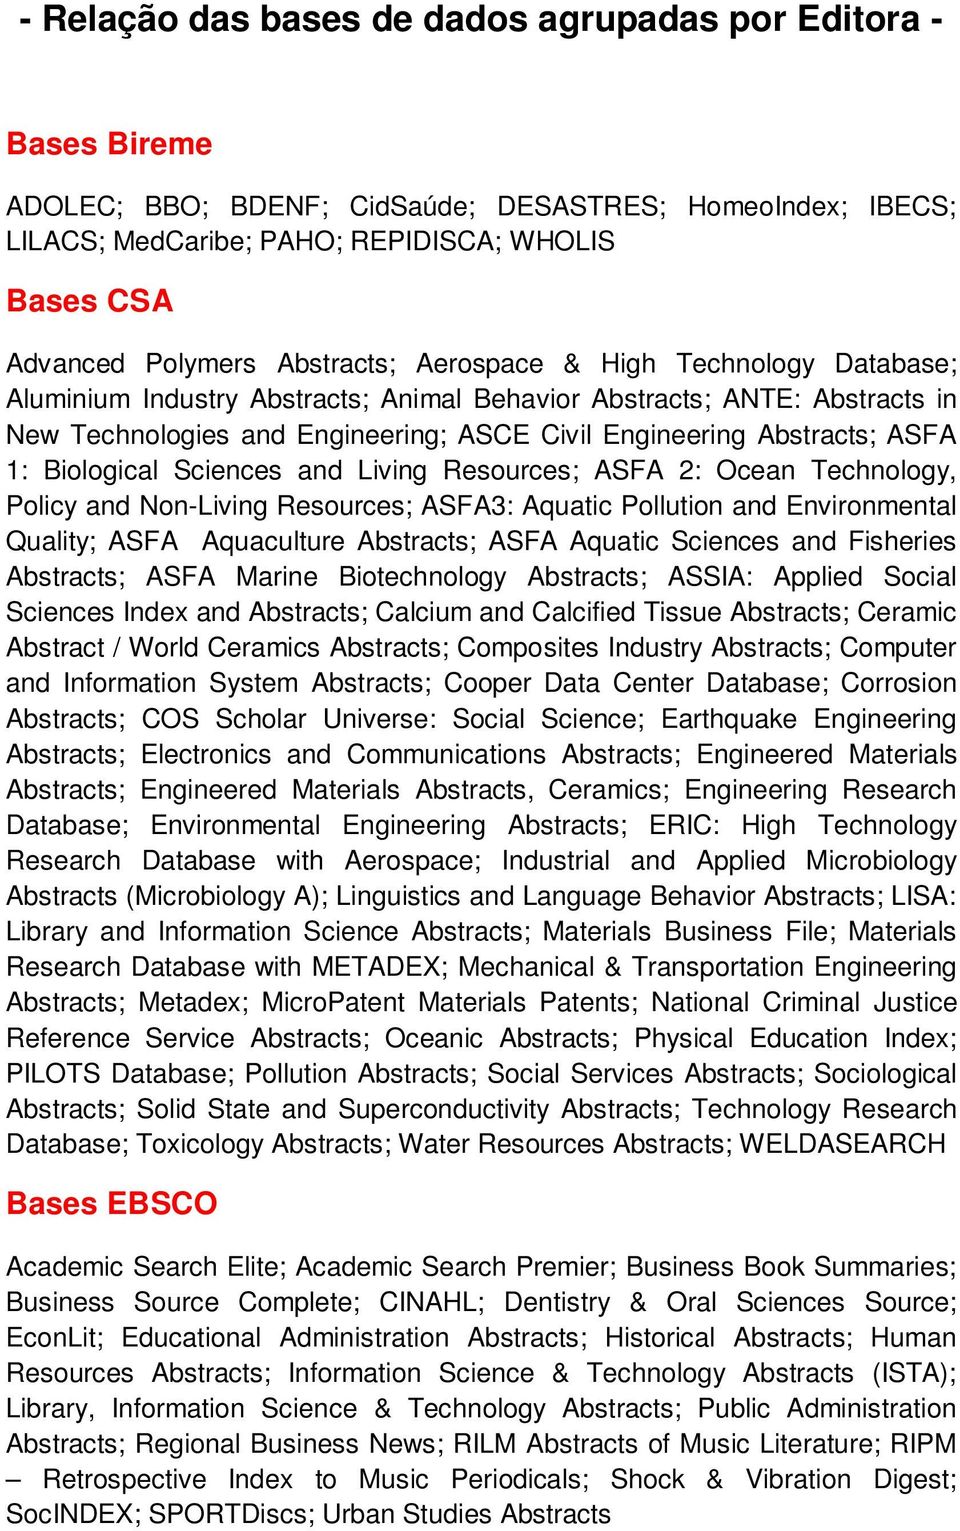 1: Biological Sciences and Living Resources; ASFA 2: Ocean Technology, Policy and Non-Living Resources; ASFA3: Aquatic Pollution and Environmental Quality; ASFA Aquaculture Abstracts; ASFA Aquatic